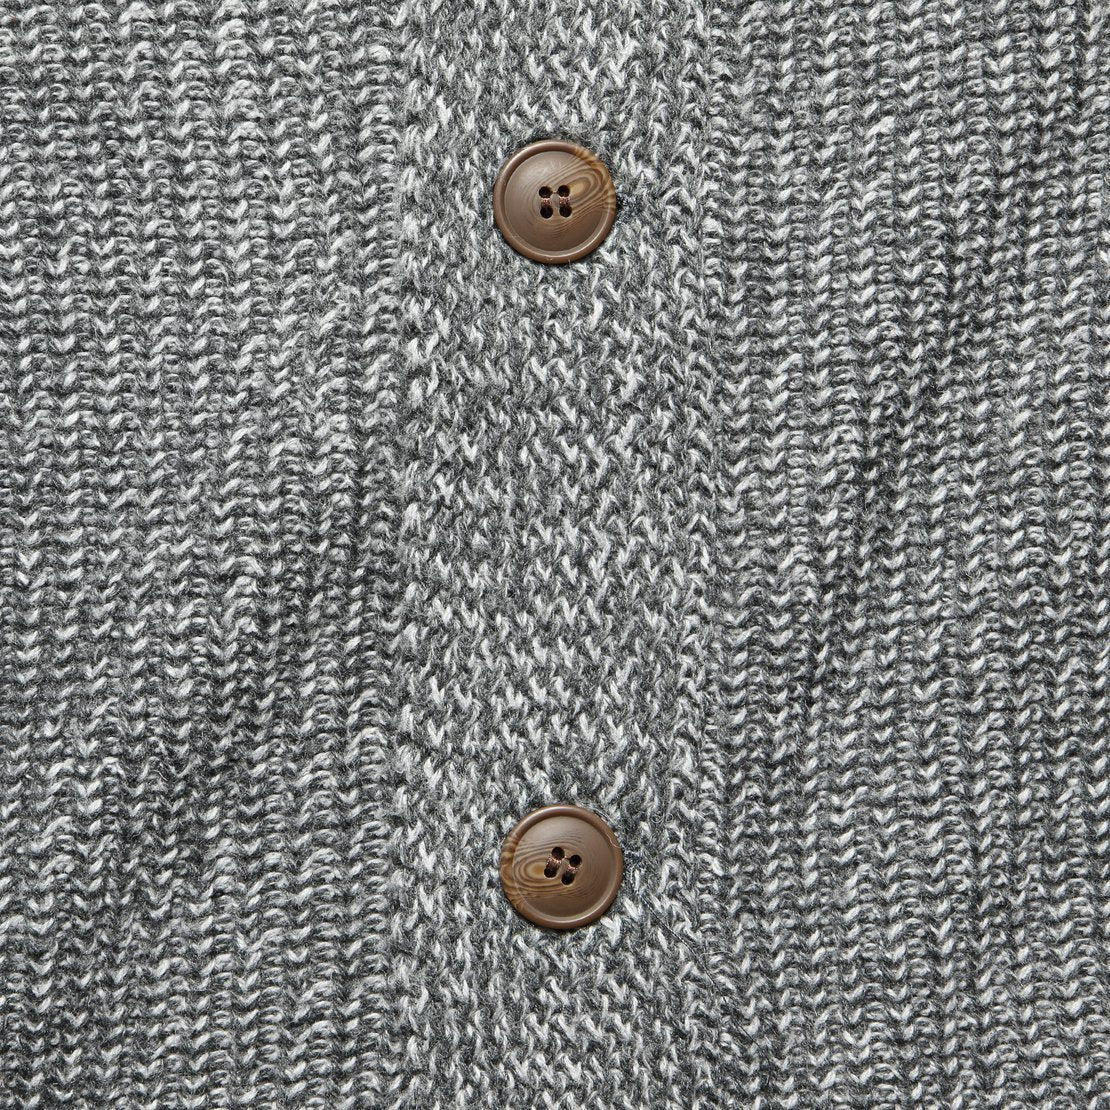 Belmont Plaited Cardigan Sweater - Charcoal - Grayers - STAG Provisions - Tops - Sweater